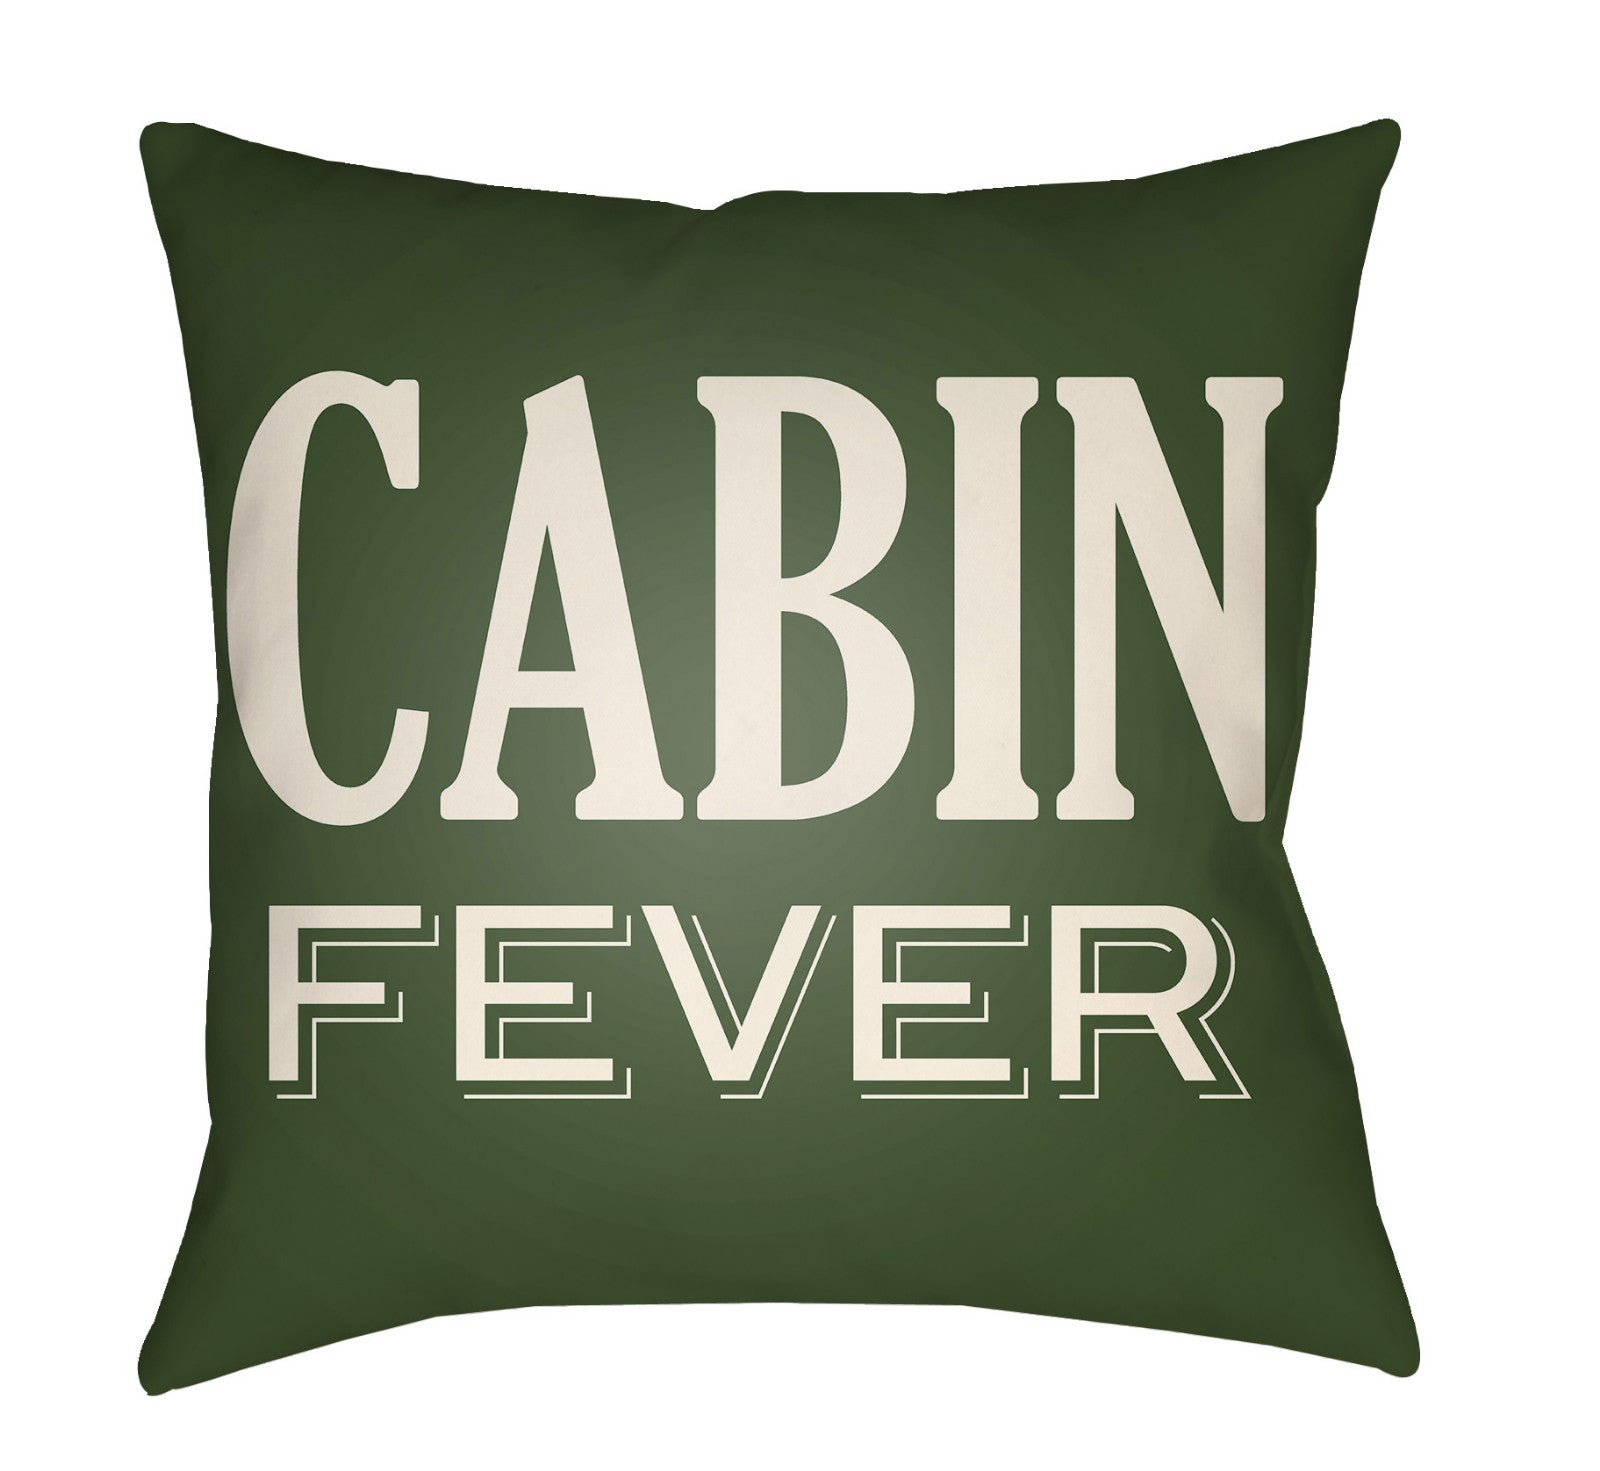 Artistic Weavers Lodge Cabin Fever Forest Green/Beige main image